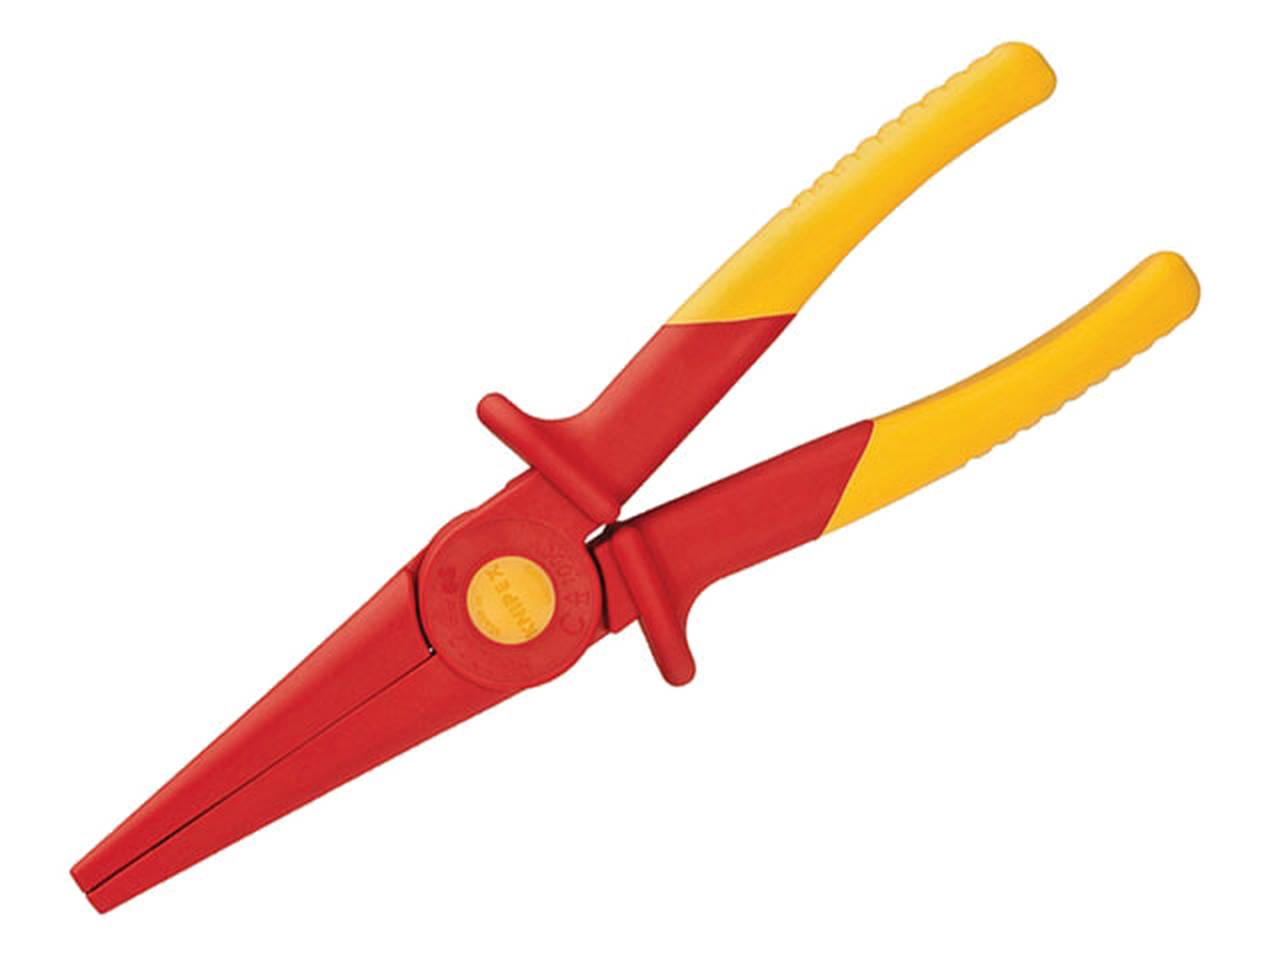 Knipex Kpx986202 Long Nose Plastic Insulated Pliers 220mm